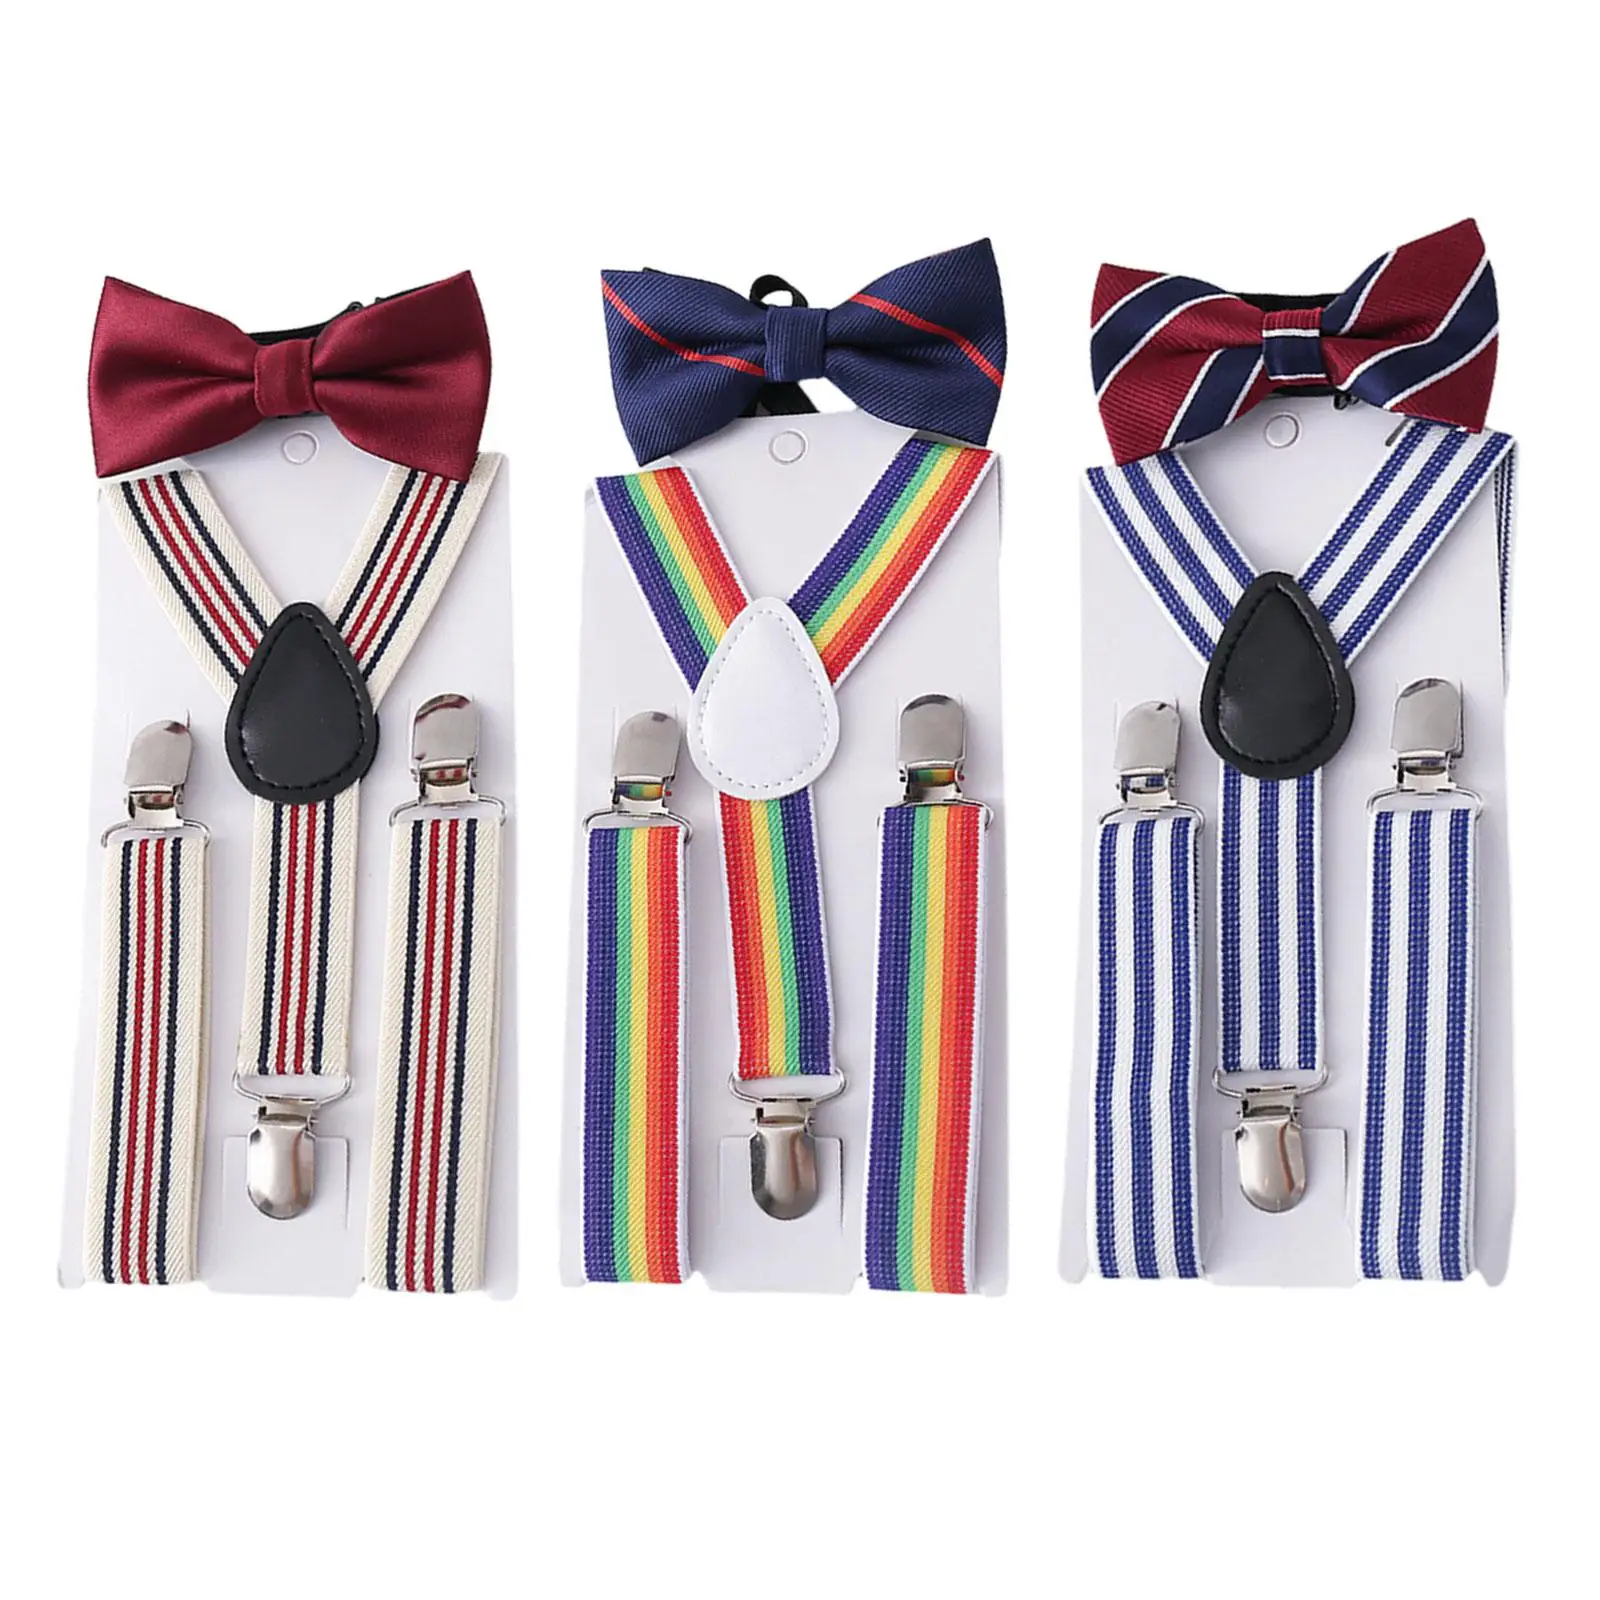 Kids Suspender Bowtie Set Elastic Straps with Clips Pants Suspender Y Shape Braces for Cosplay Wedding Jeans Halloween Trousers